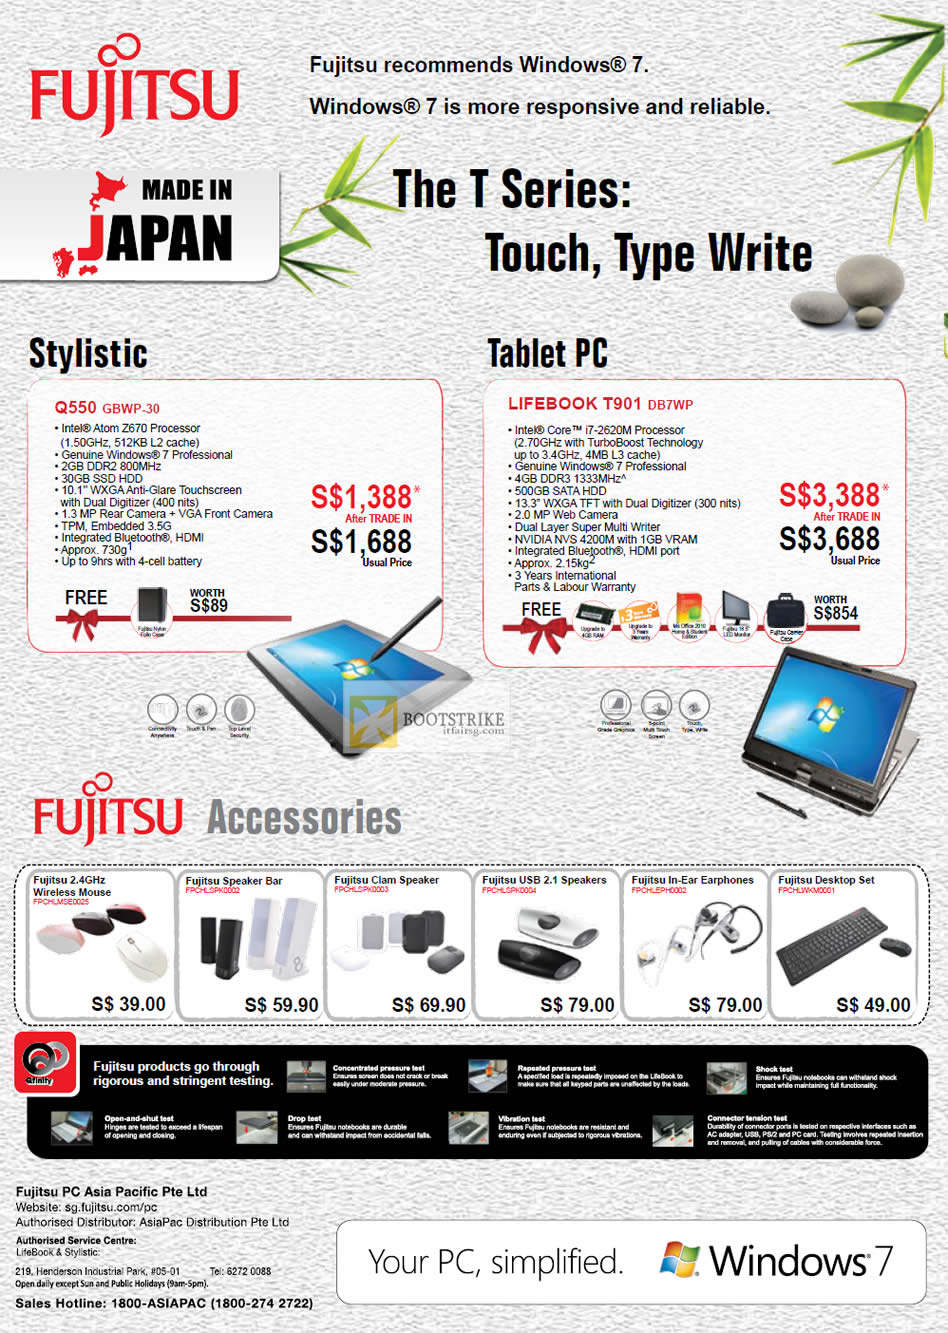 IT SHOW 2012 price list image brochure of Fujitsu Notebooks Tablet Lifebook Q550 GBWP-30, T901 DB7WP, Accessories